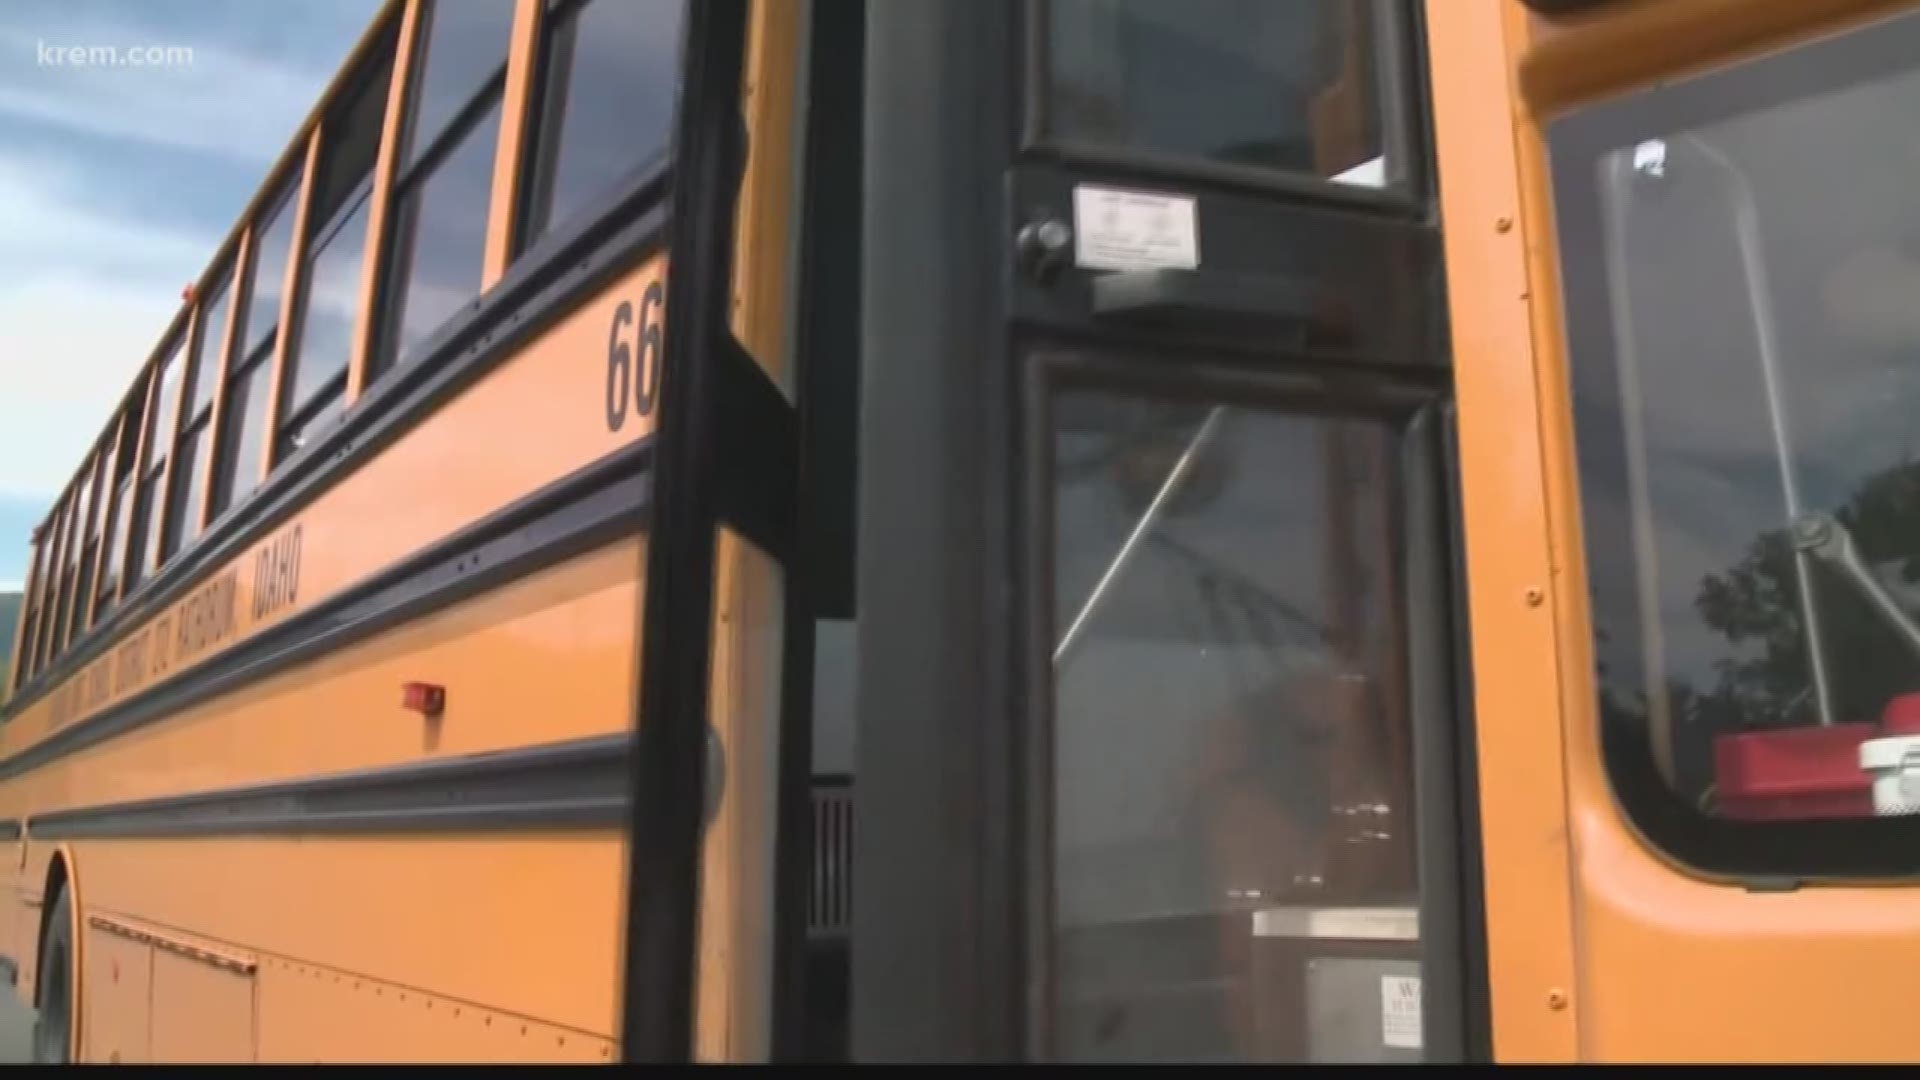 KREM's Amanda Roley spoke with the father of a who says SPS buses lost track of his son twice. He hopes talking about it will lead the district to make changes.